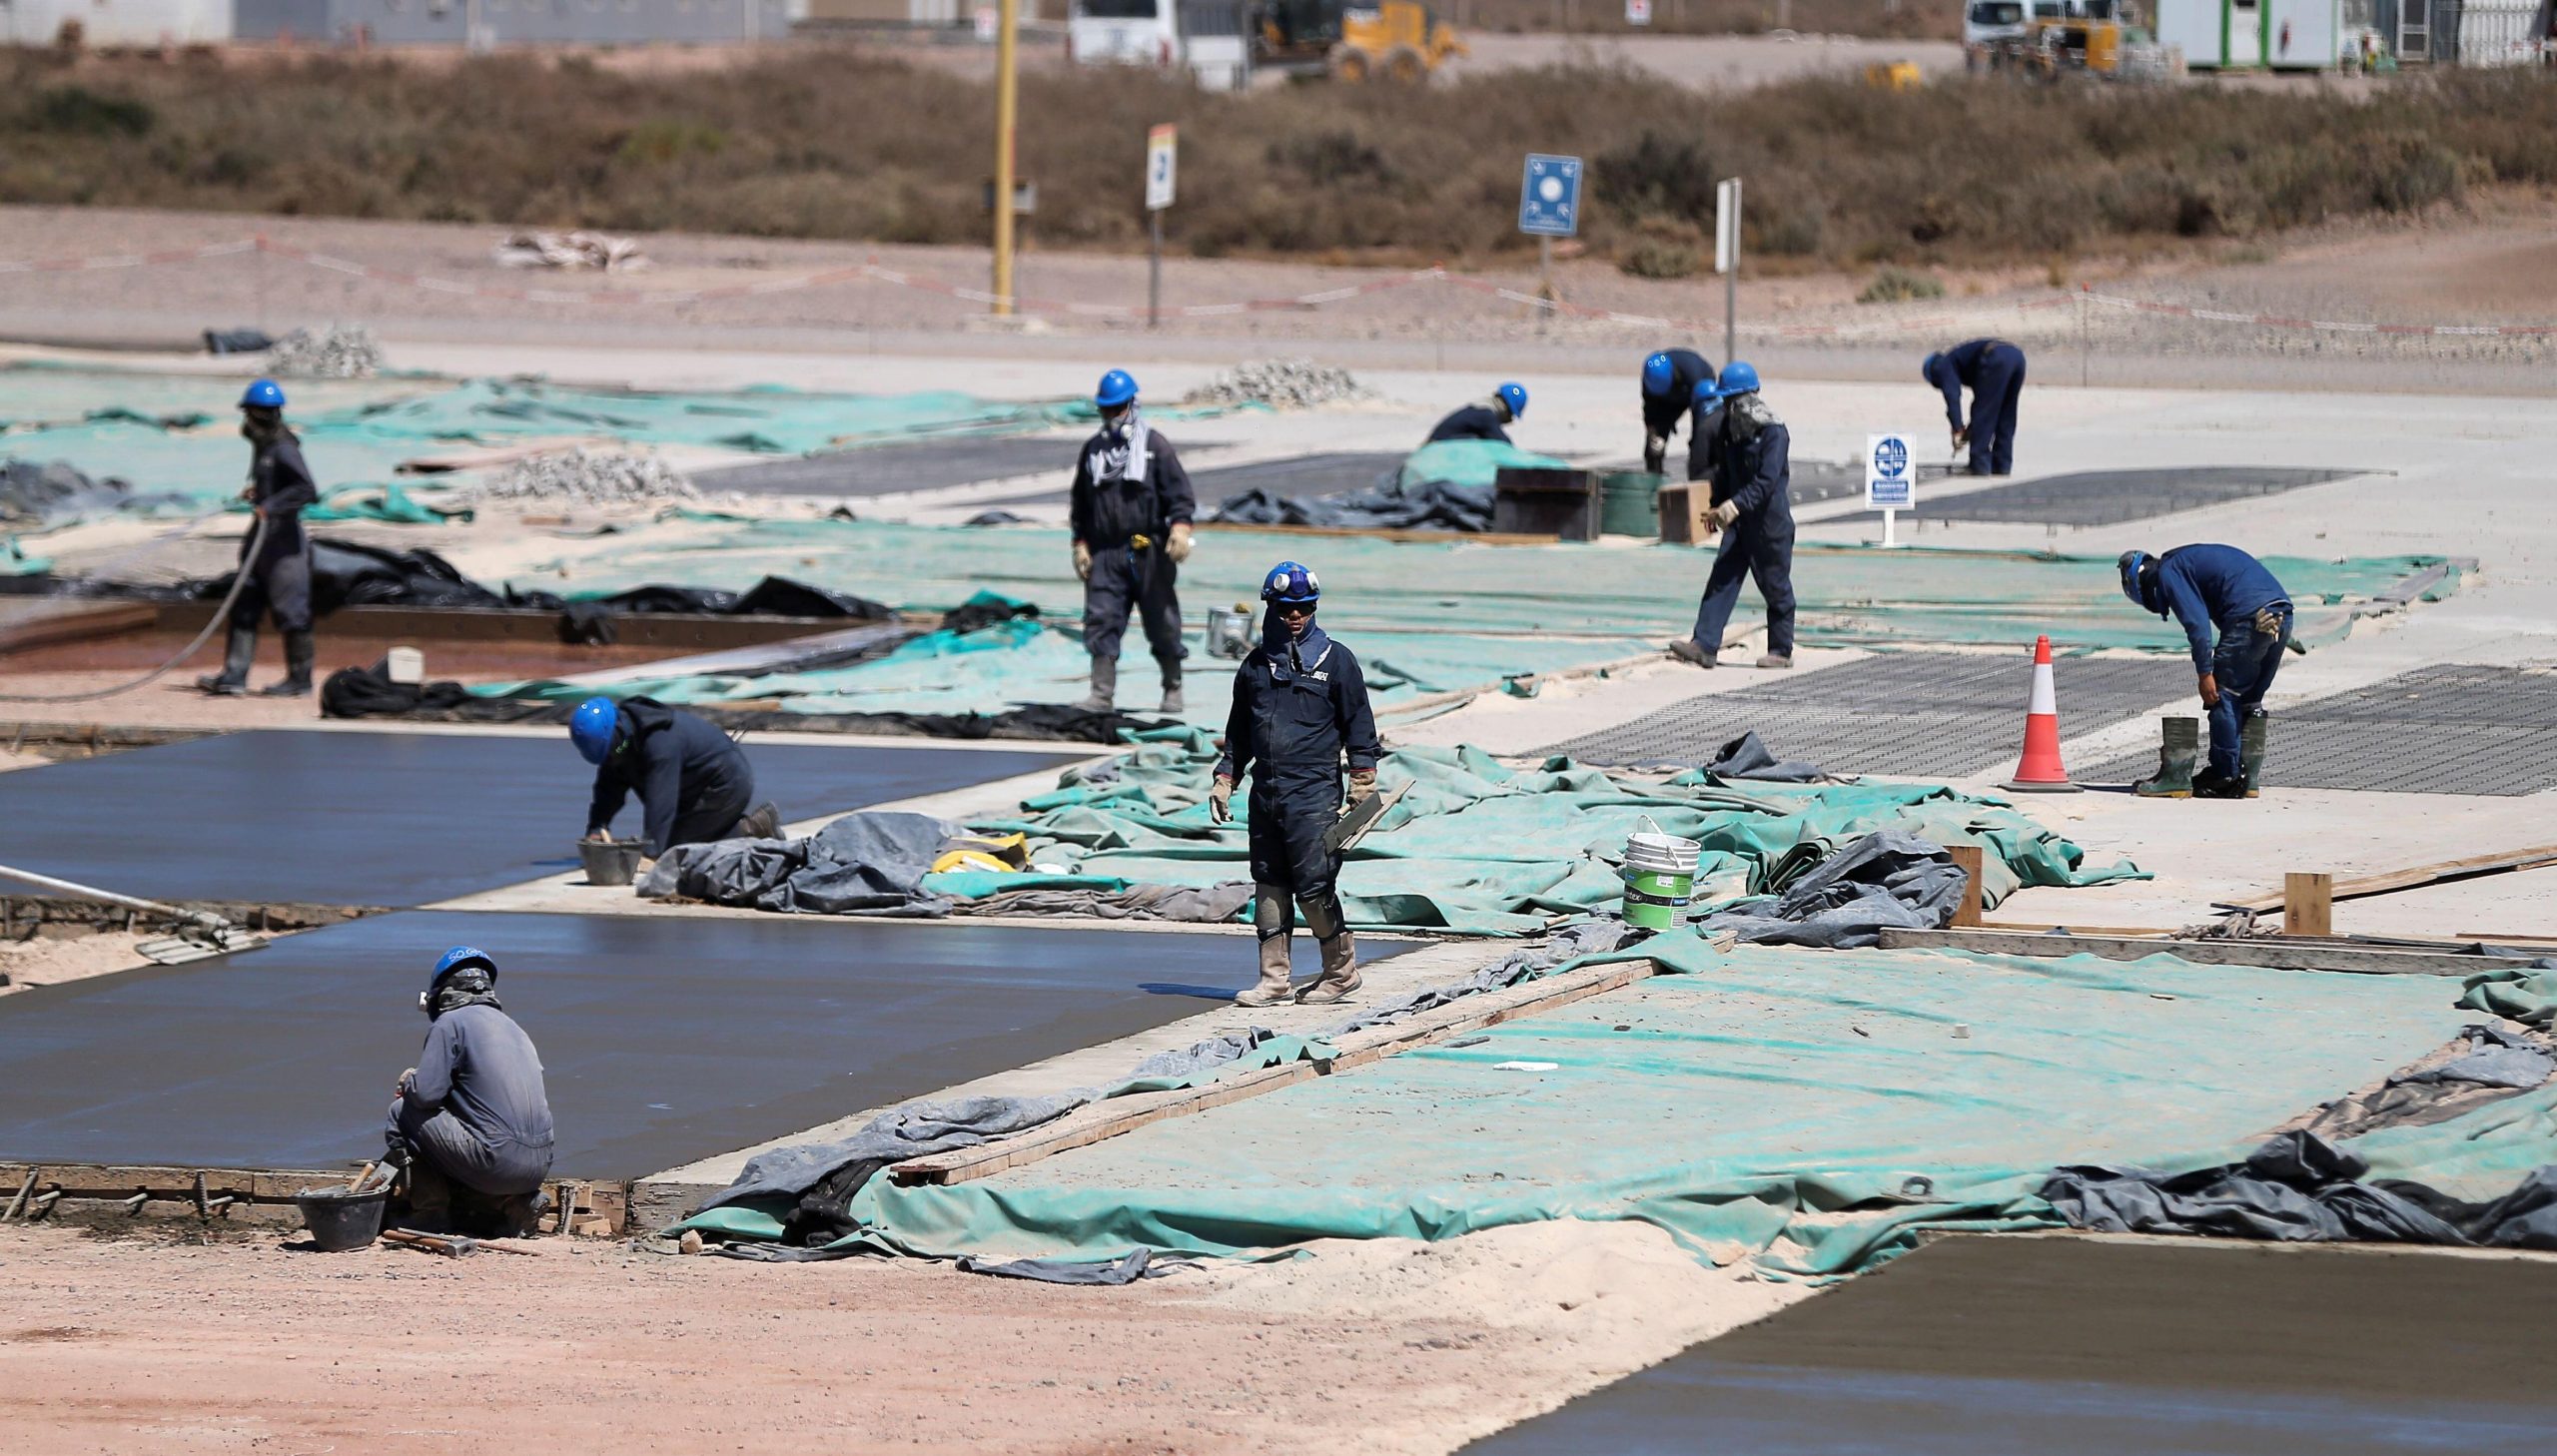 Workers at a sand refinery for fracking projects at Vaca Muerta fields in Argentina